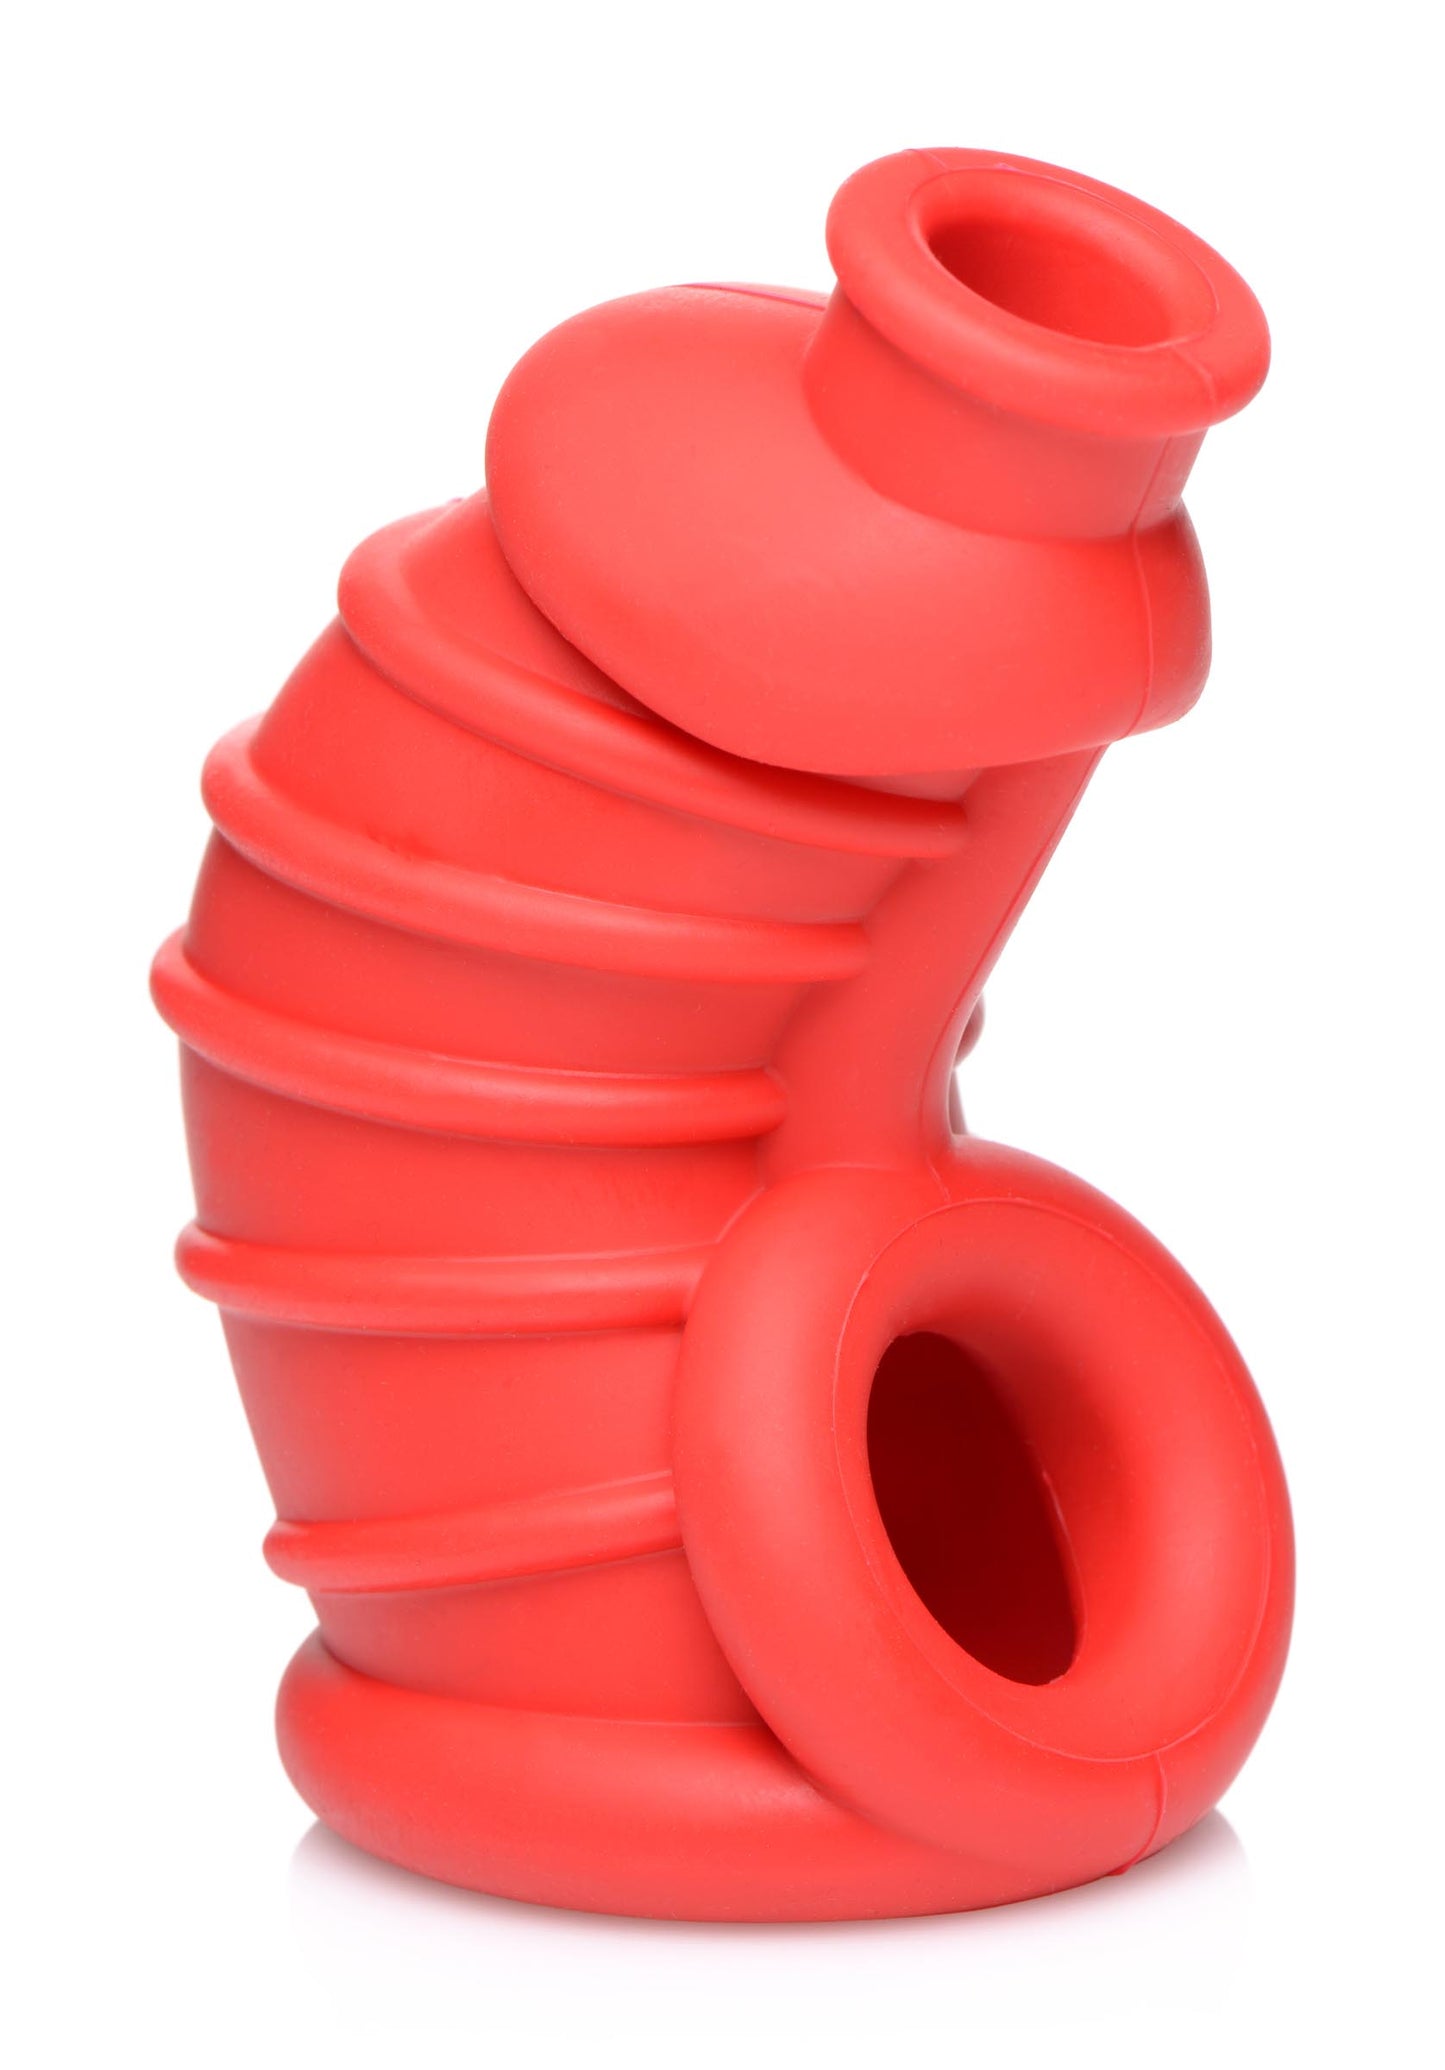 Red Chamber Silicone Chastity Cage - UABDSM